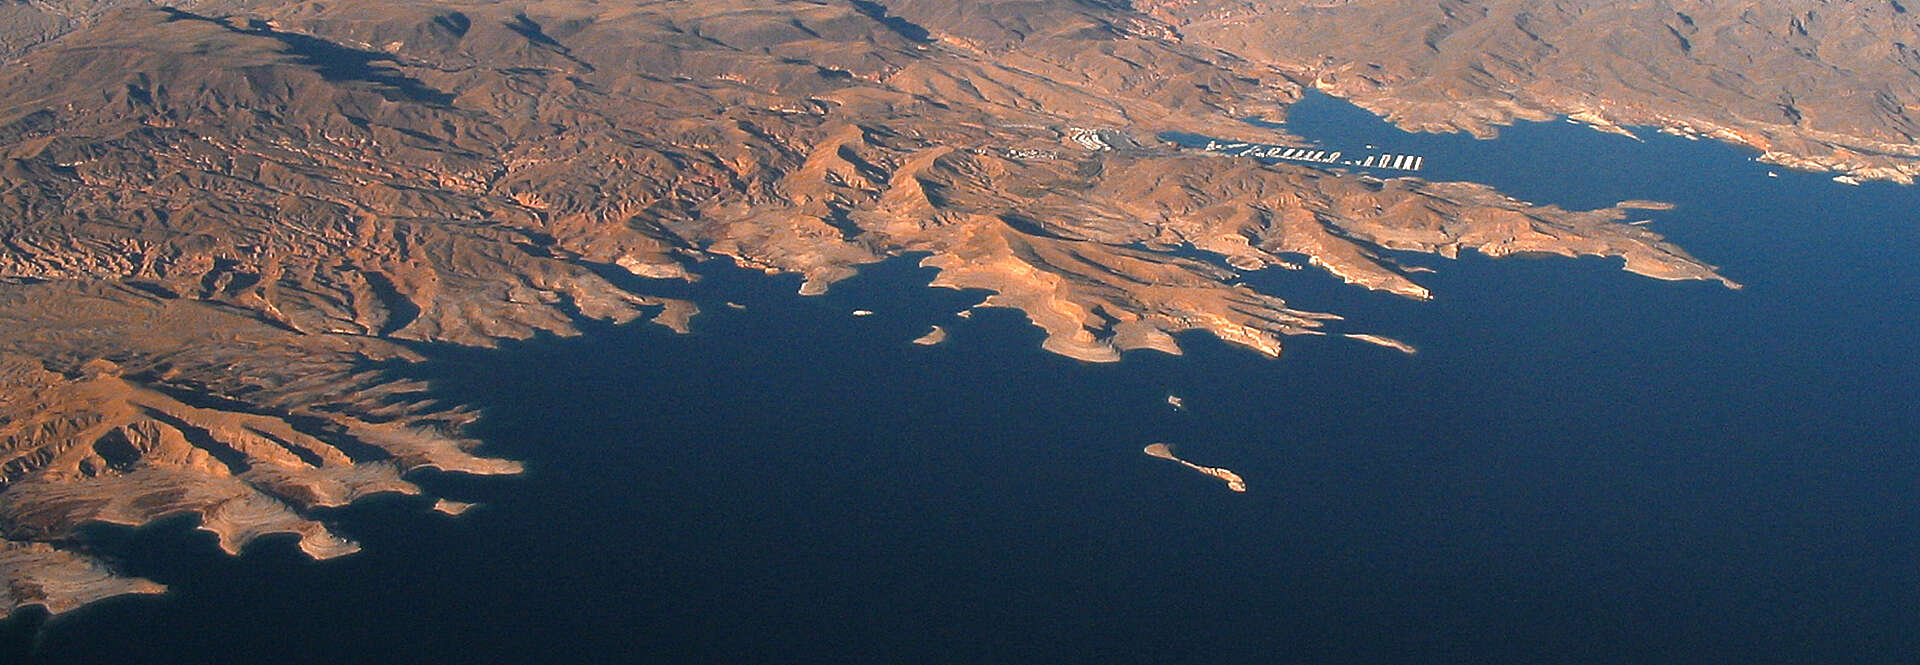 lake mead overview